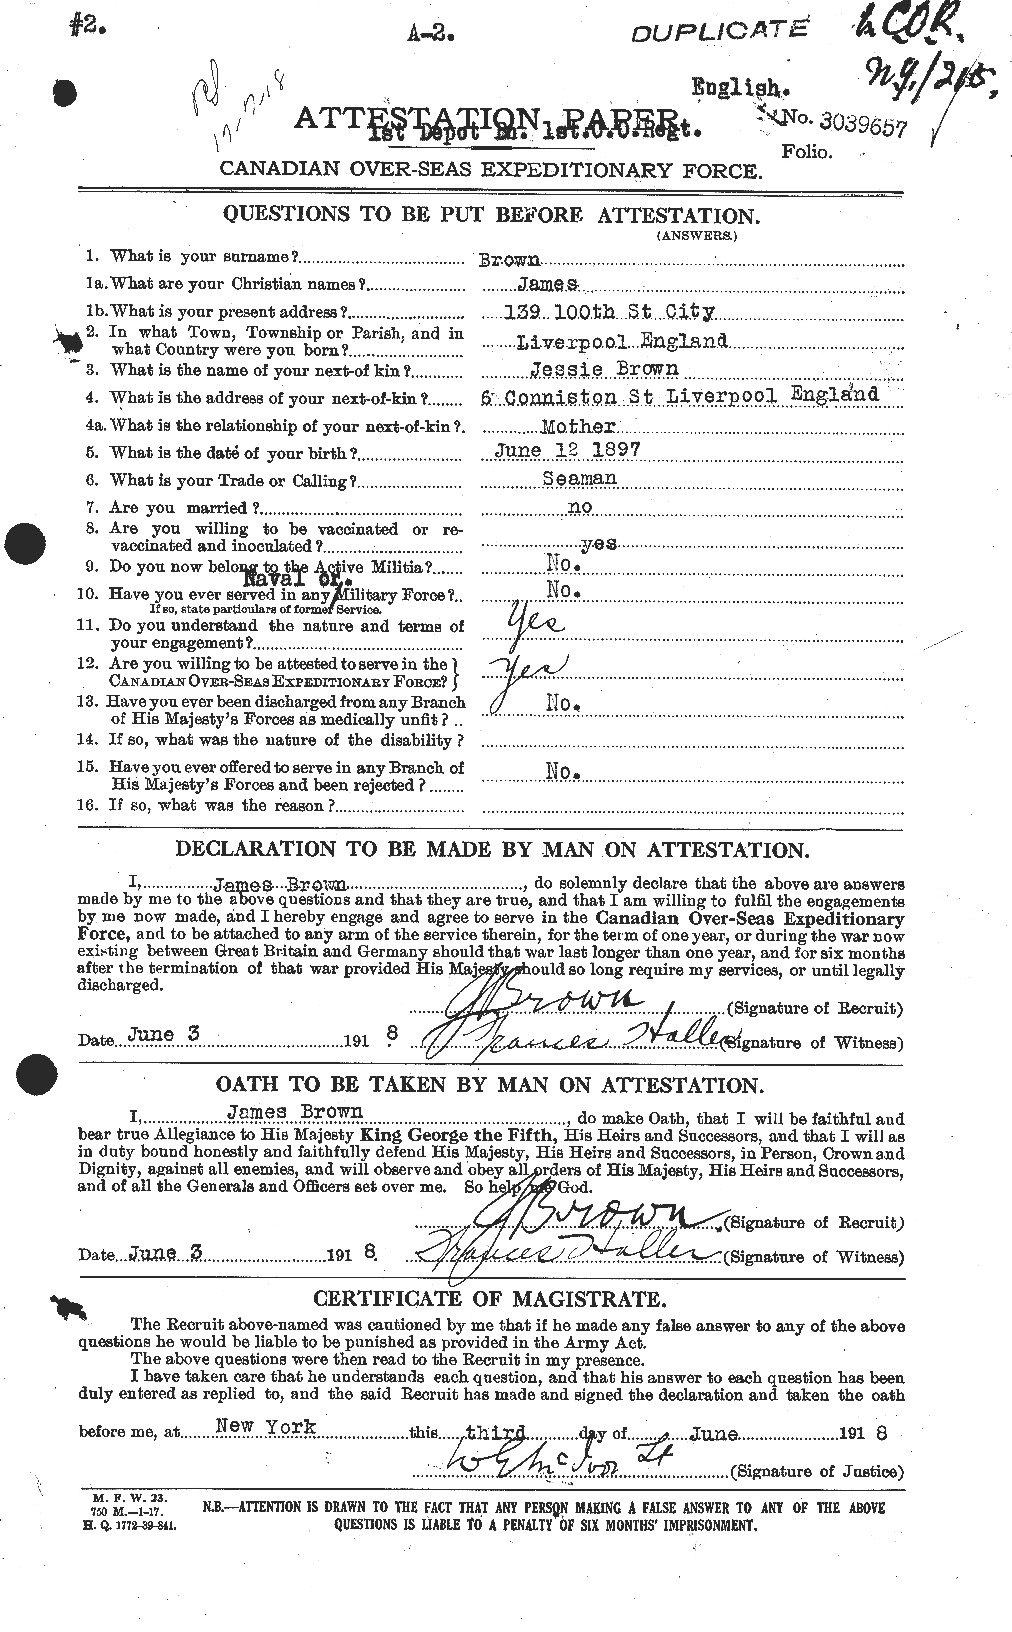 Personnel Records of the First World War - CEF 265772a